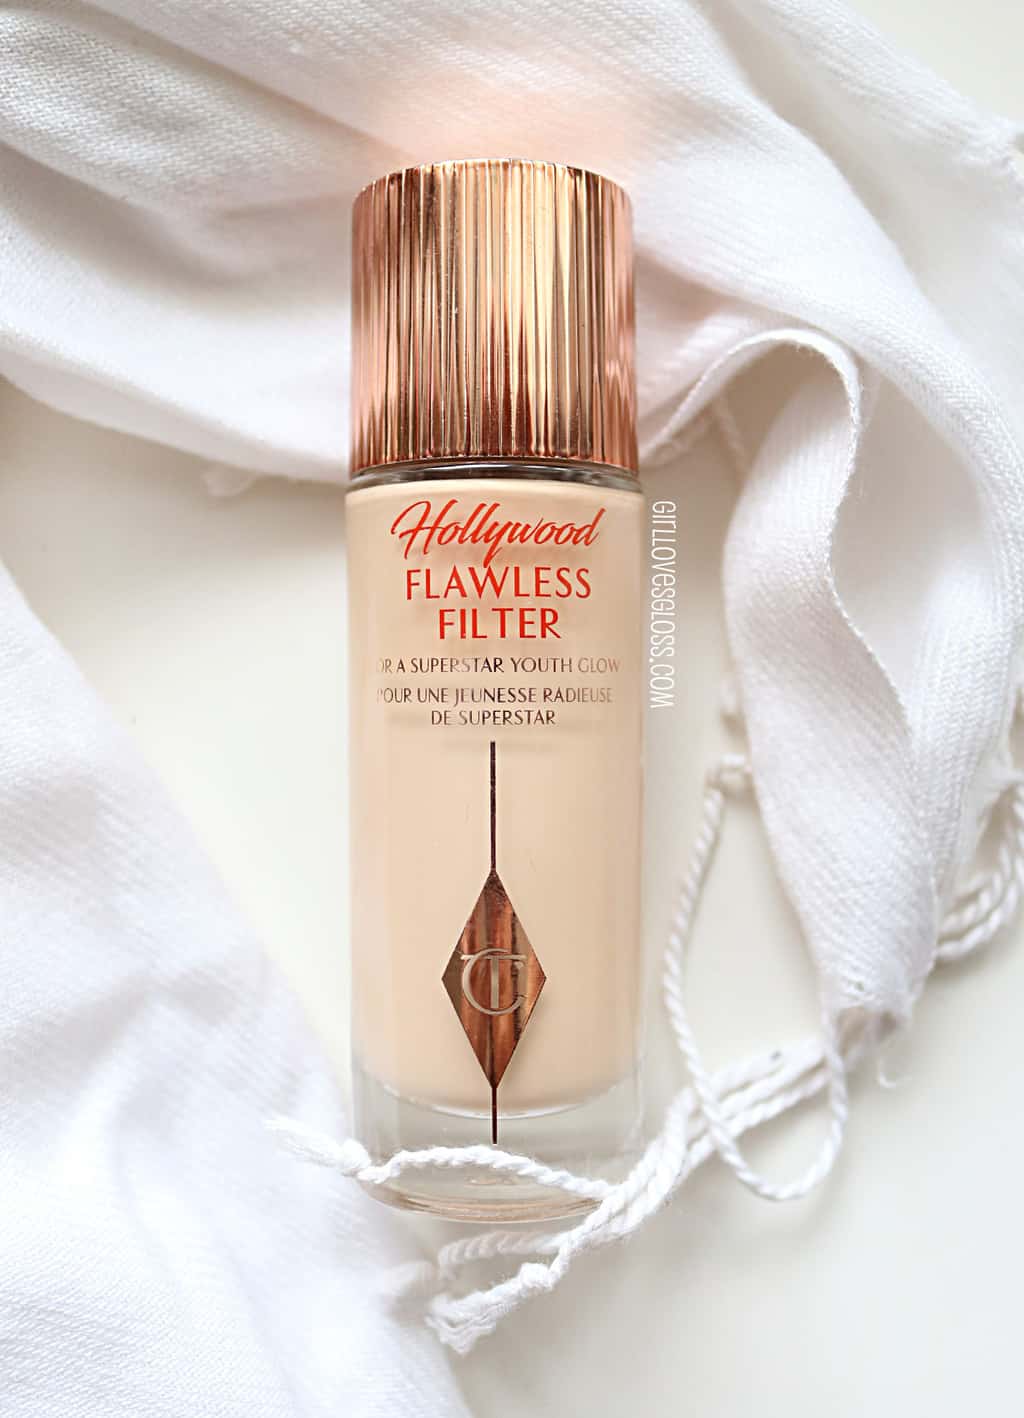 Charlotte Tilbury Hollywood Flawless Filter | Review + Swatches